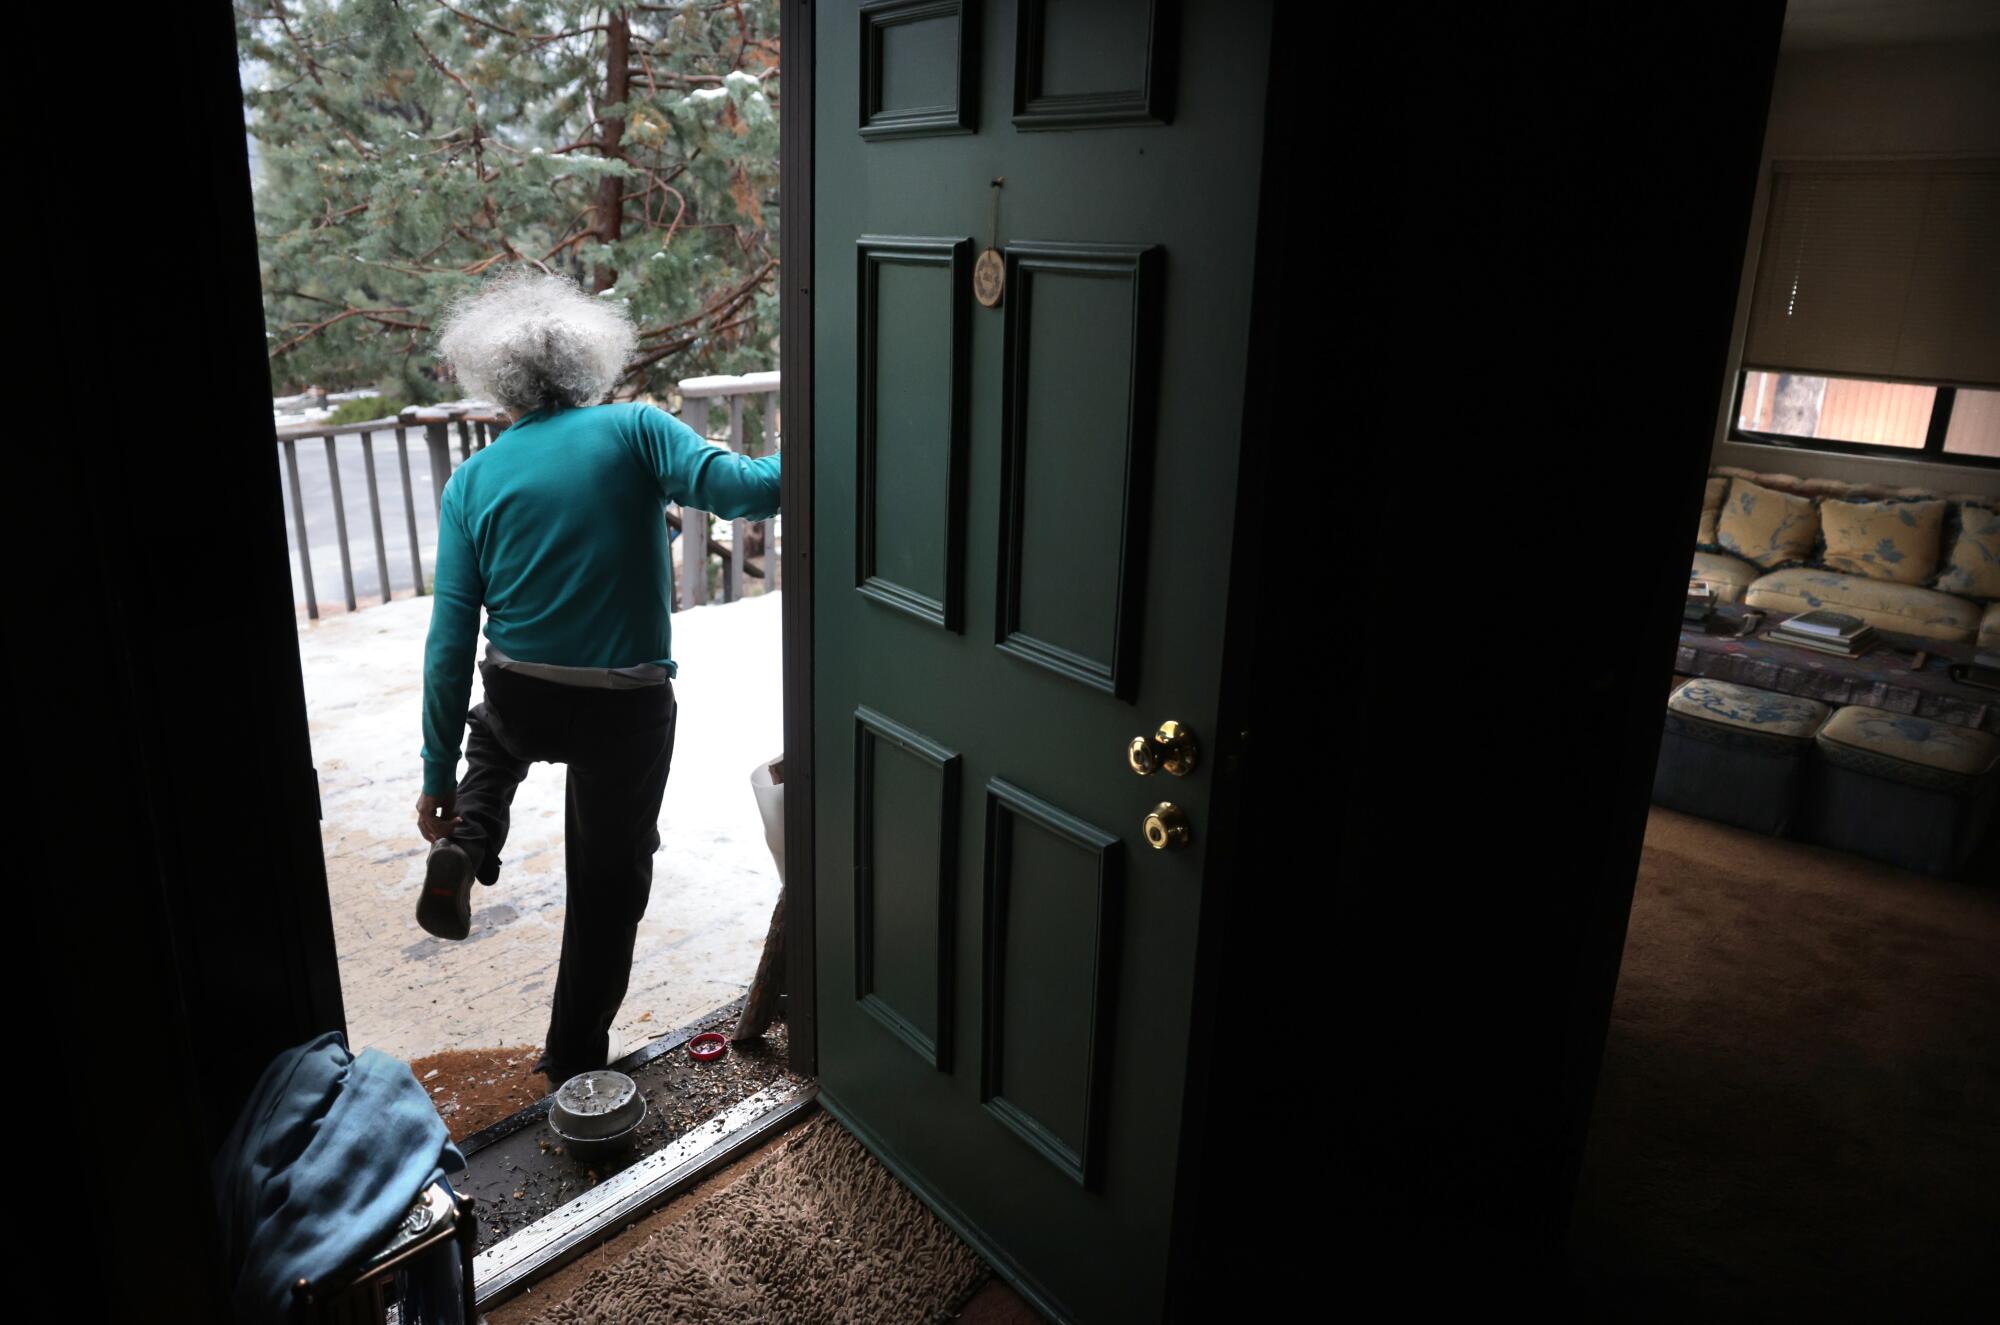 A man with gray hair, in a turquoise shirt and dark pants, heads out his front door into a snowy landscape with trees 